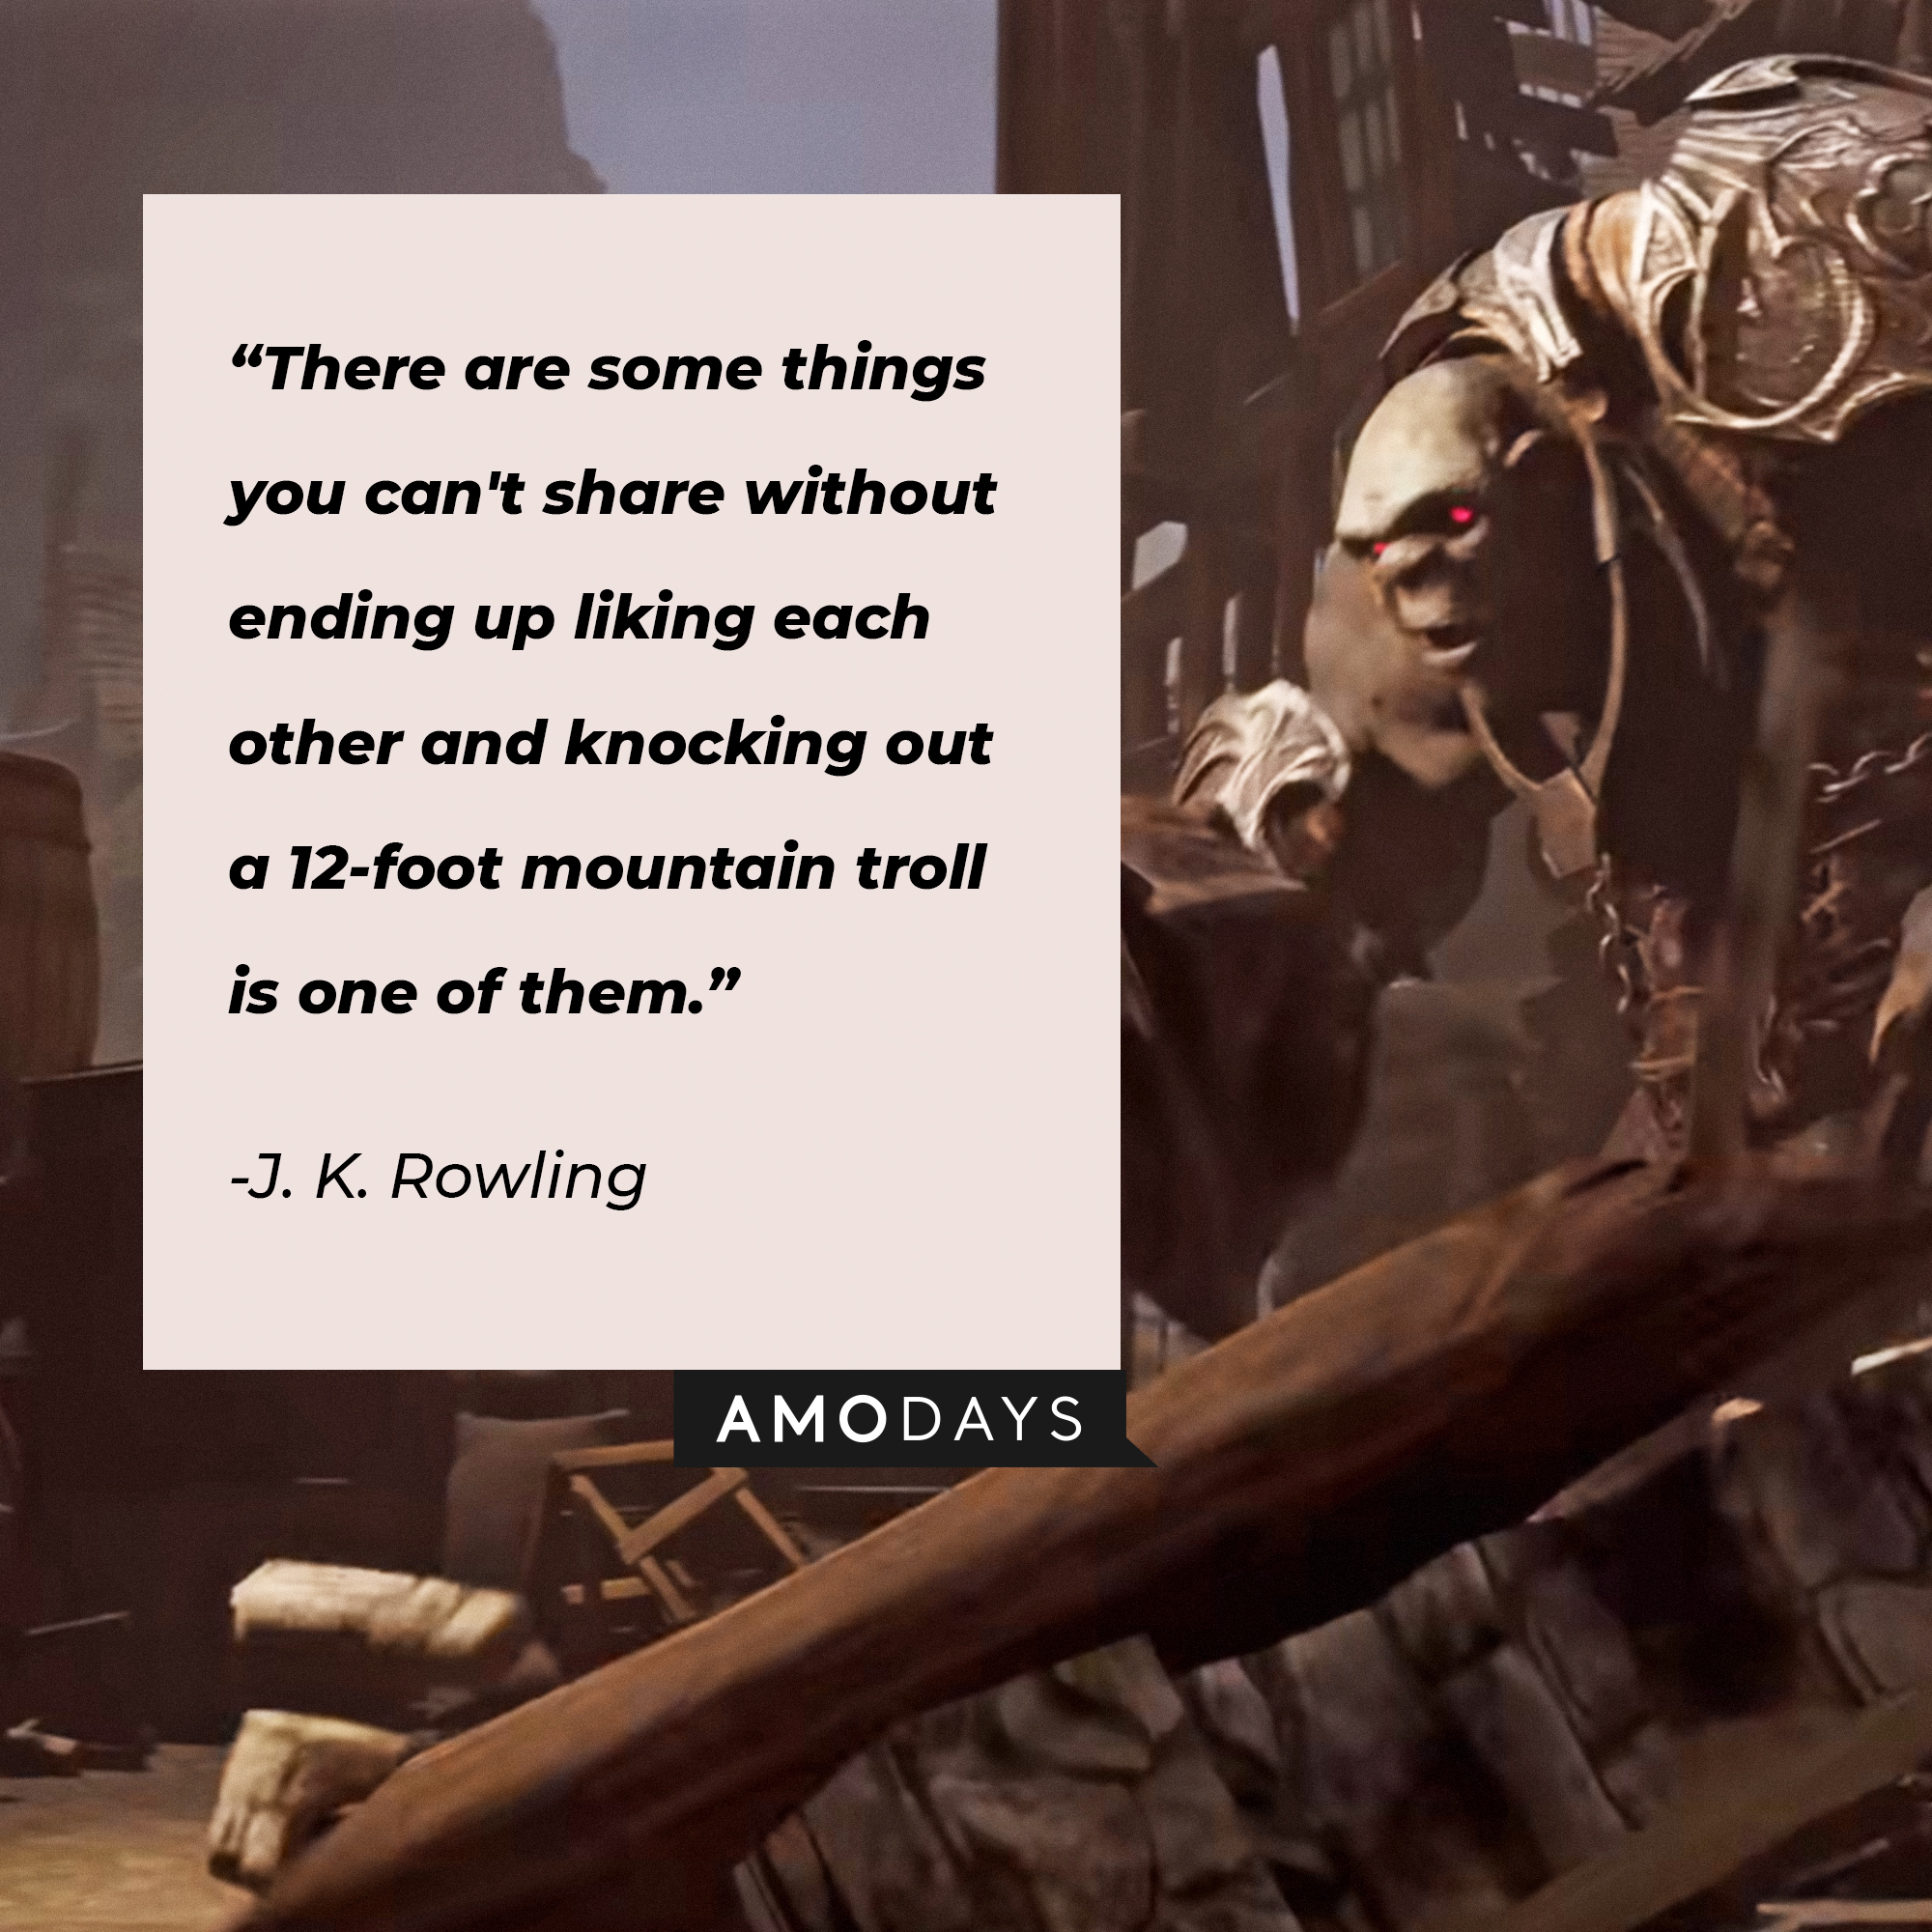 J. K. Rowling's quote: "There are some things you can't share without ending up liking each other and knocking out a 12-foot mountain troll is one of them." | Source: Youtube.com/HogwartsLegacy